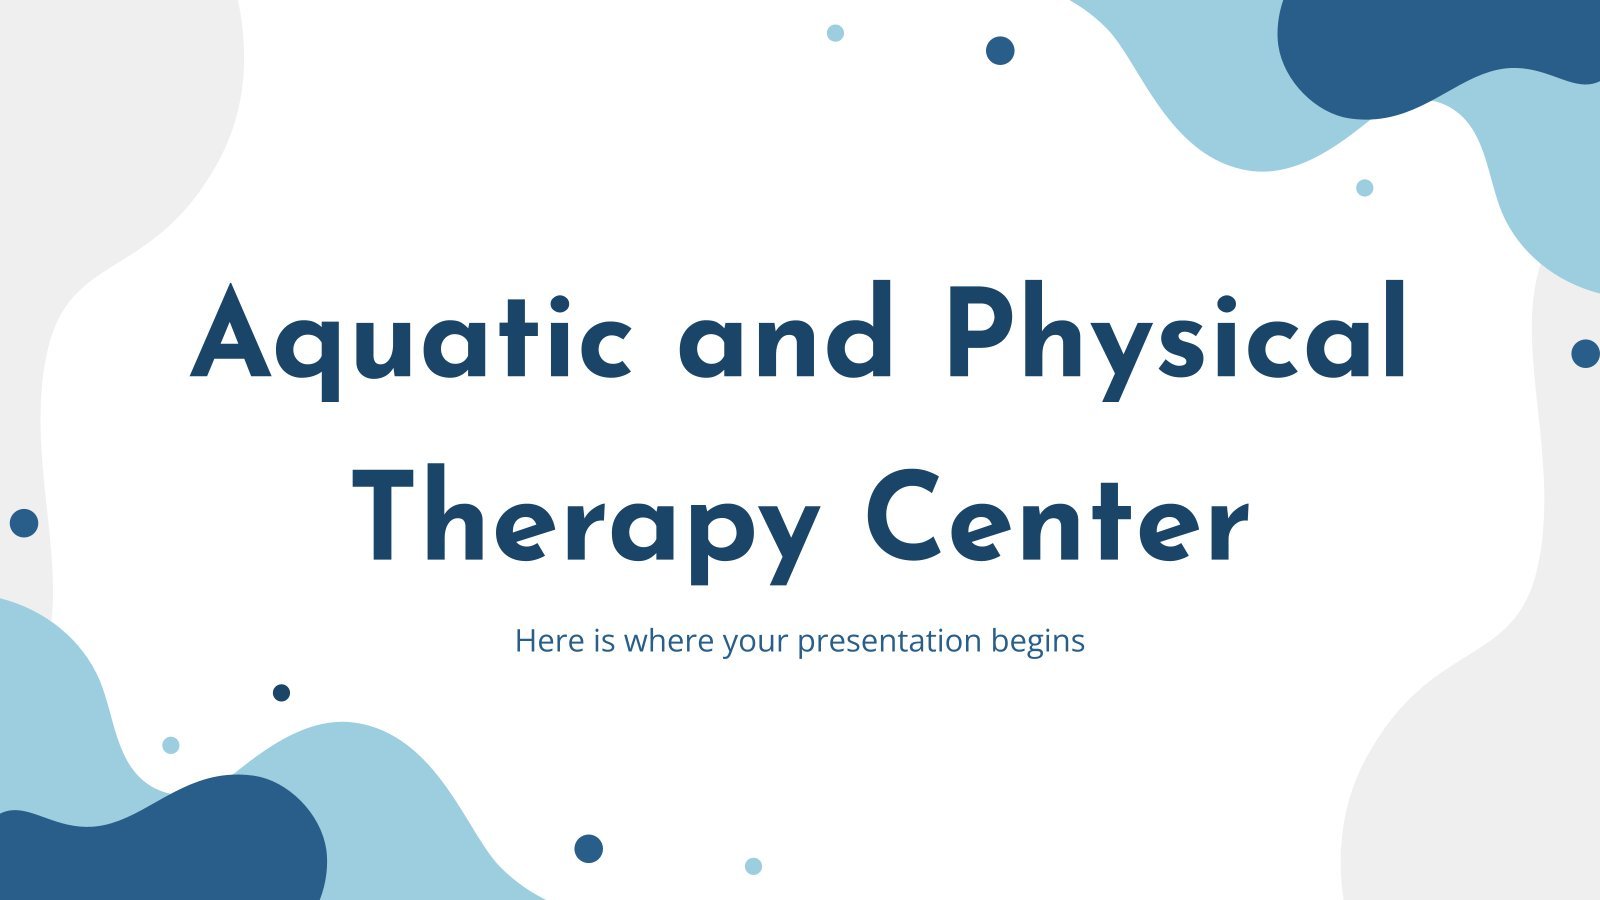 Aquatic and Physical Therapy Center presentation template 